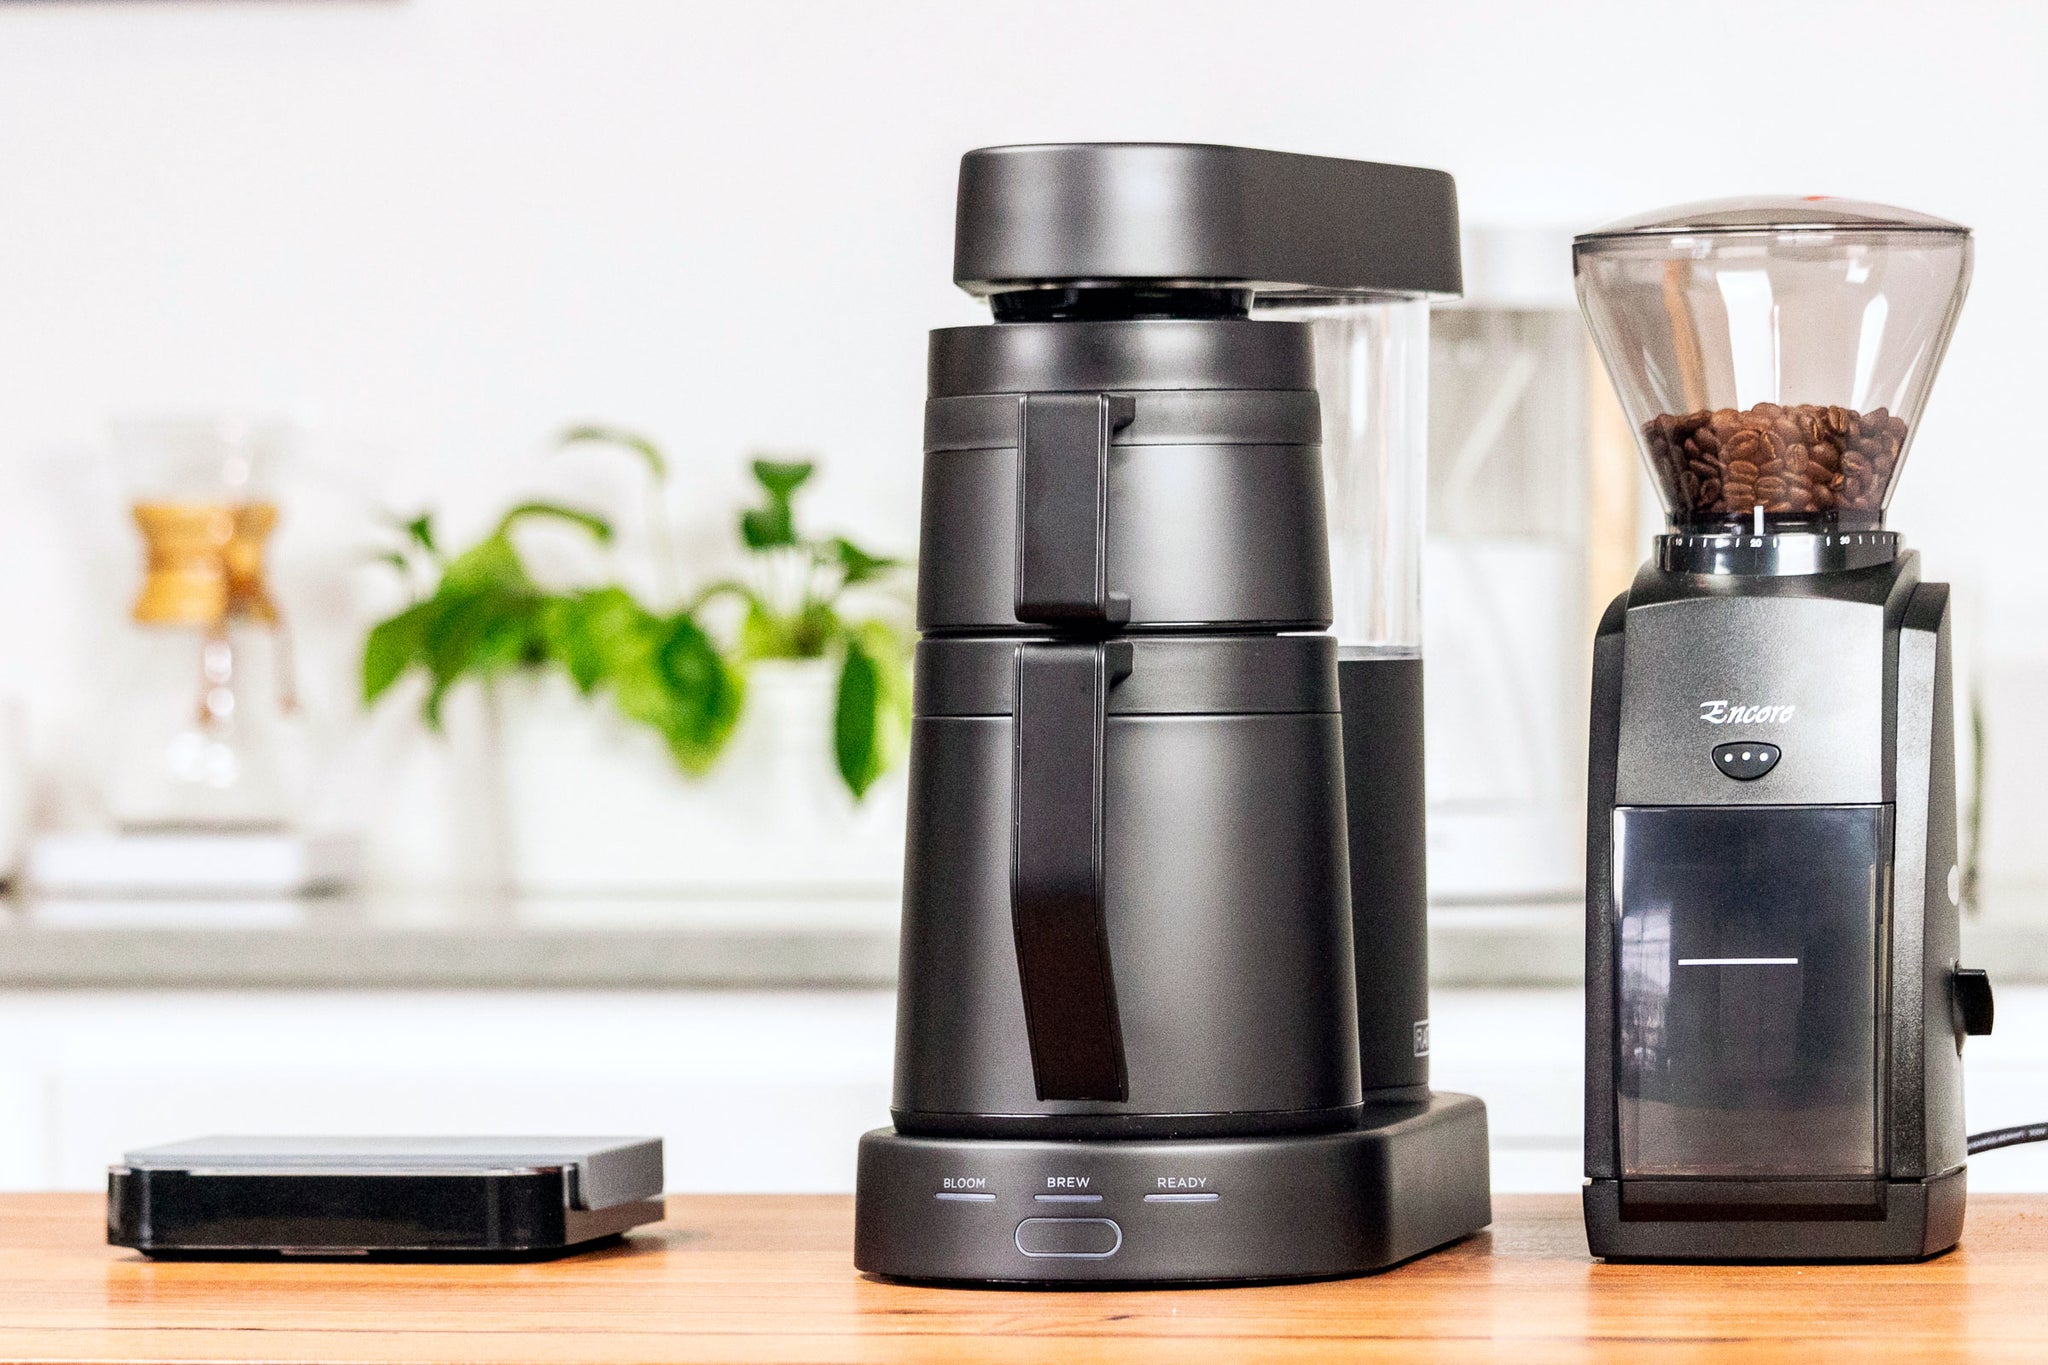 Ratio Six Coffee Maker Overview